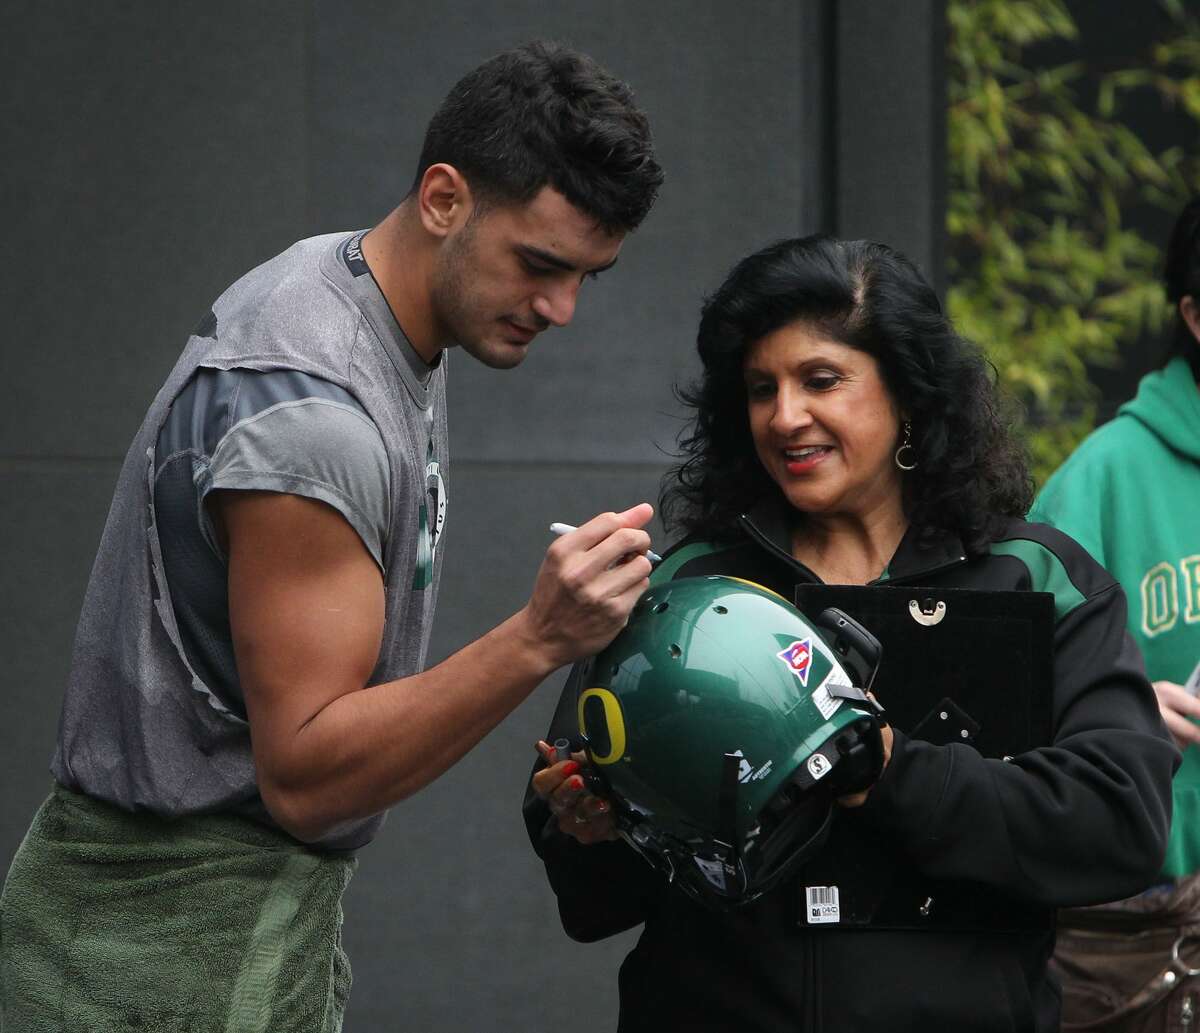 Oregon quarterback Marcus Mariota, left, signs an autograph for a fan after Wednesday’s practice in Eugene, Ore.